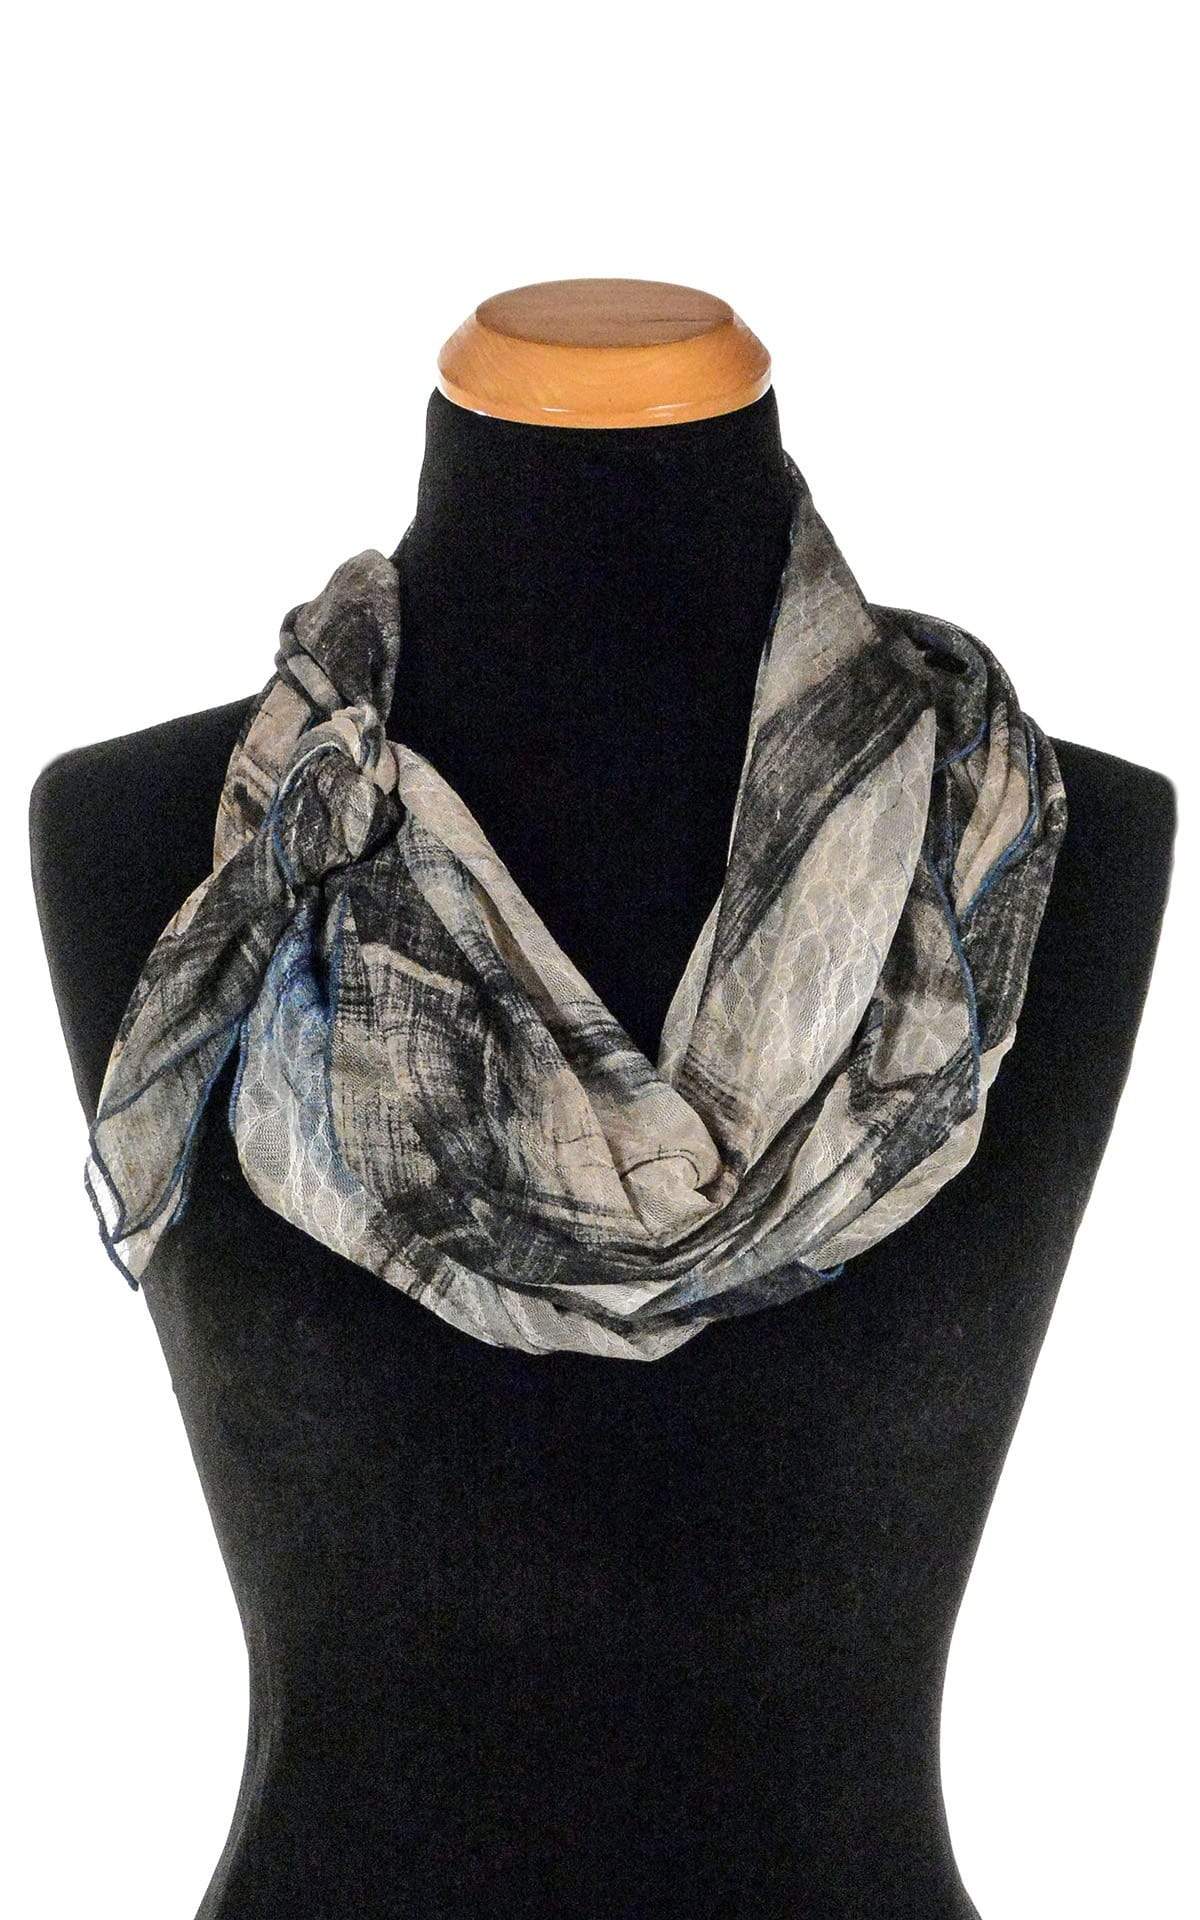 Women’s Large Handkerchief Scarf, Wrap on Mannequin double wrapped shown tied | Lovely Lace in Blue, a blue/beige/black print on sheer lace knit | Handmade in Seattle WA | Pandemonium Millinery